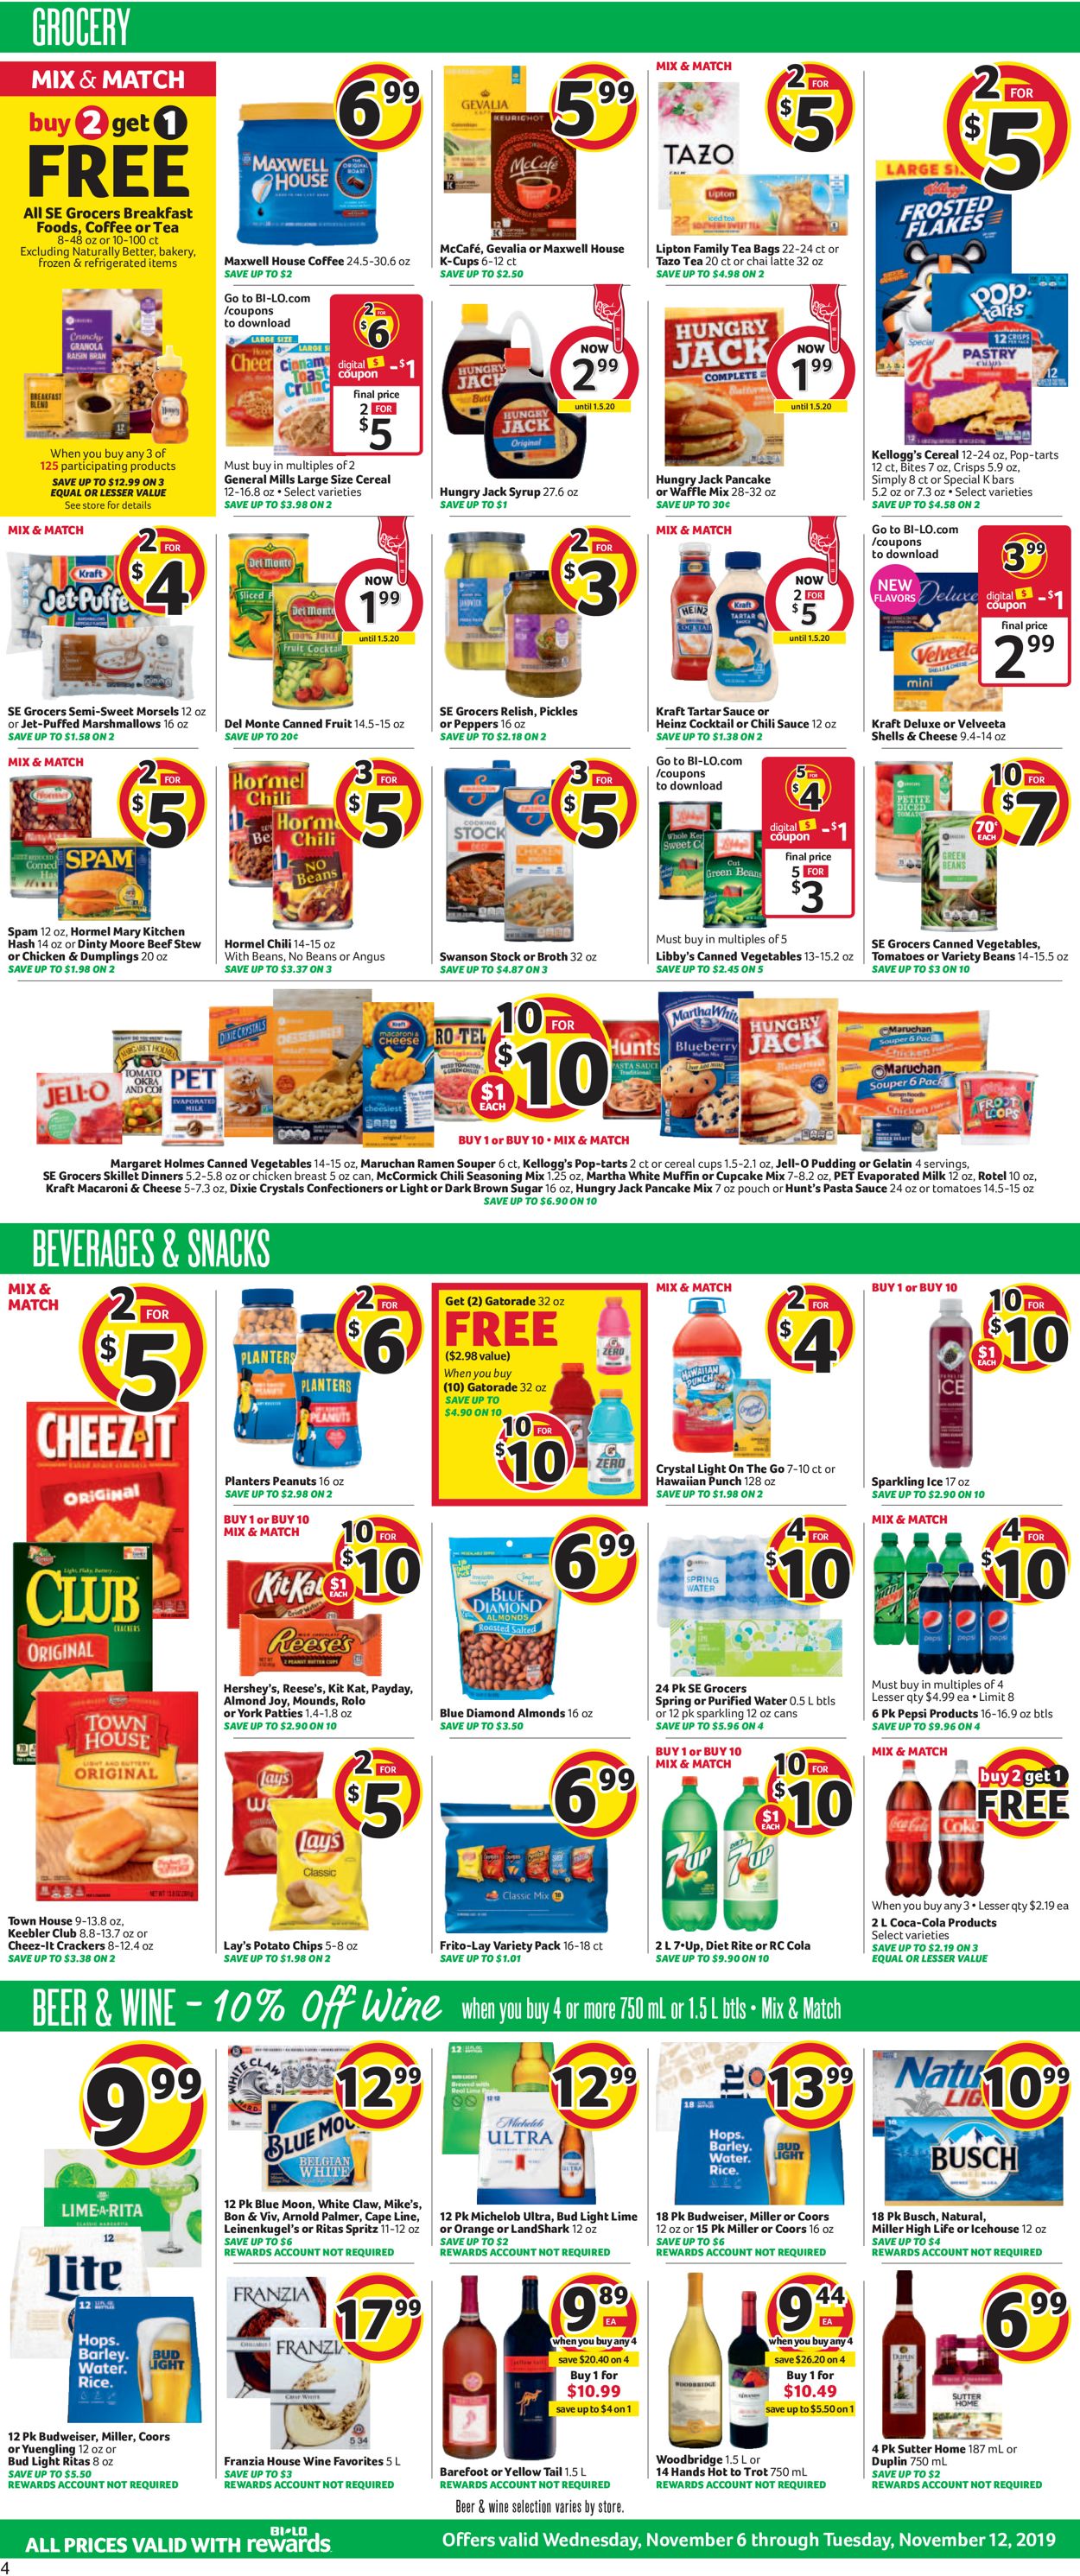 BI-LO Current weekly ad 11/06 - 11/12/2019 6 - frequent ...